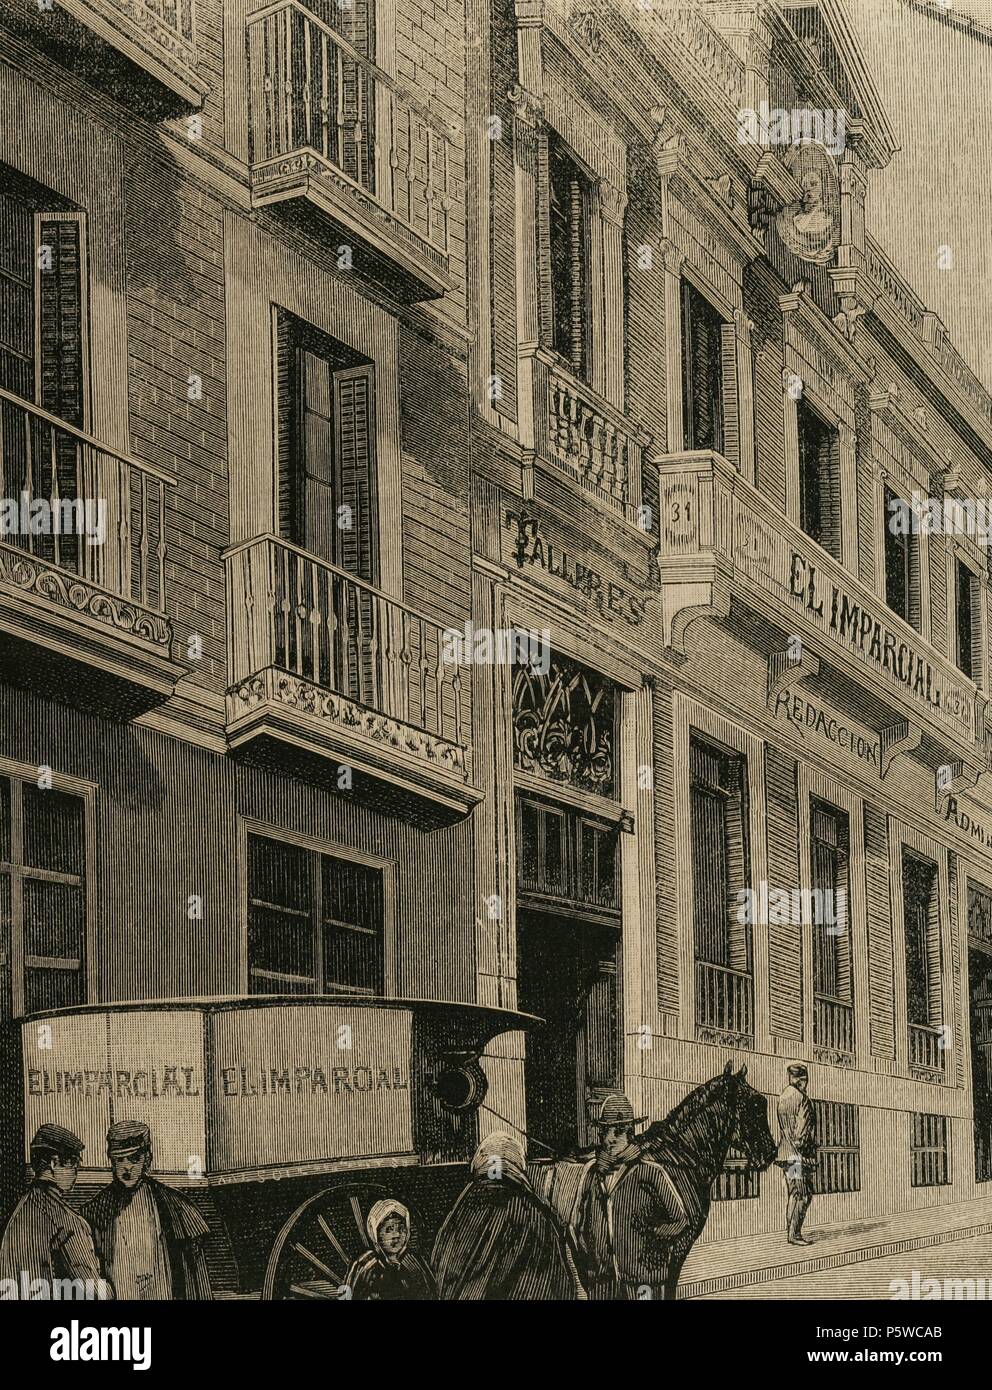 Spain. Madrid. Exterior of the new building of the newspaper El Imparcial (The Impartial). Engraving in The Spanish and American Illustration, 1889. Stock Photo